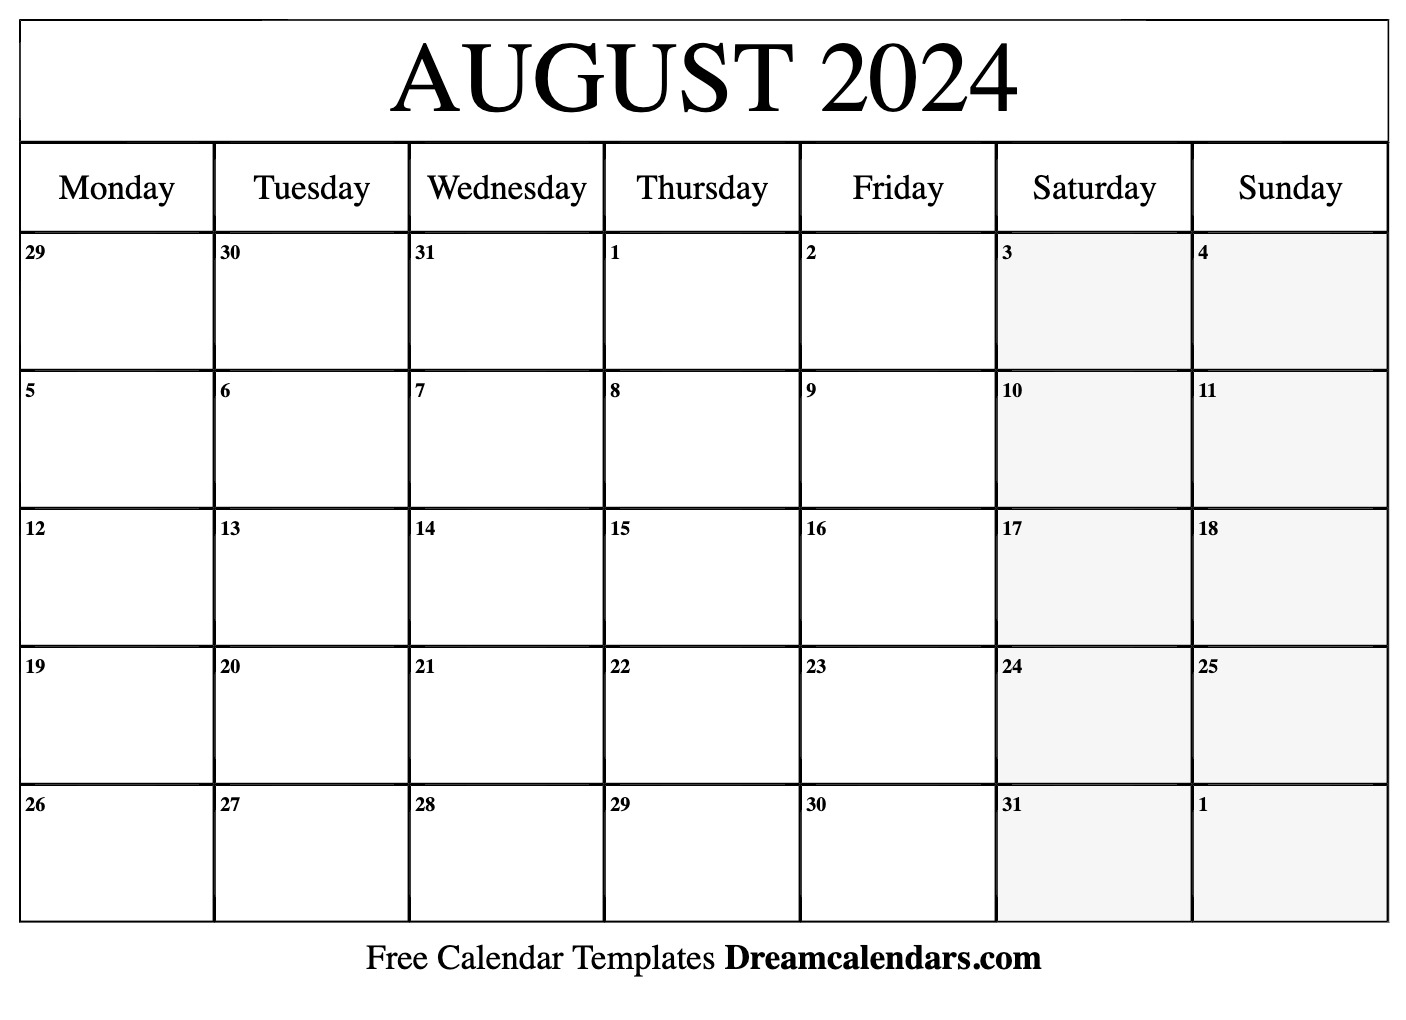 August 2024 Calendar | Free Blank Printable With Holidays for June July August 2024 Calendar Printable Free